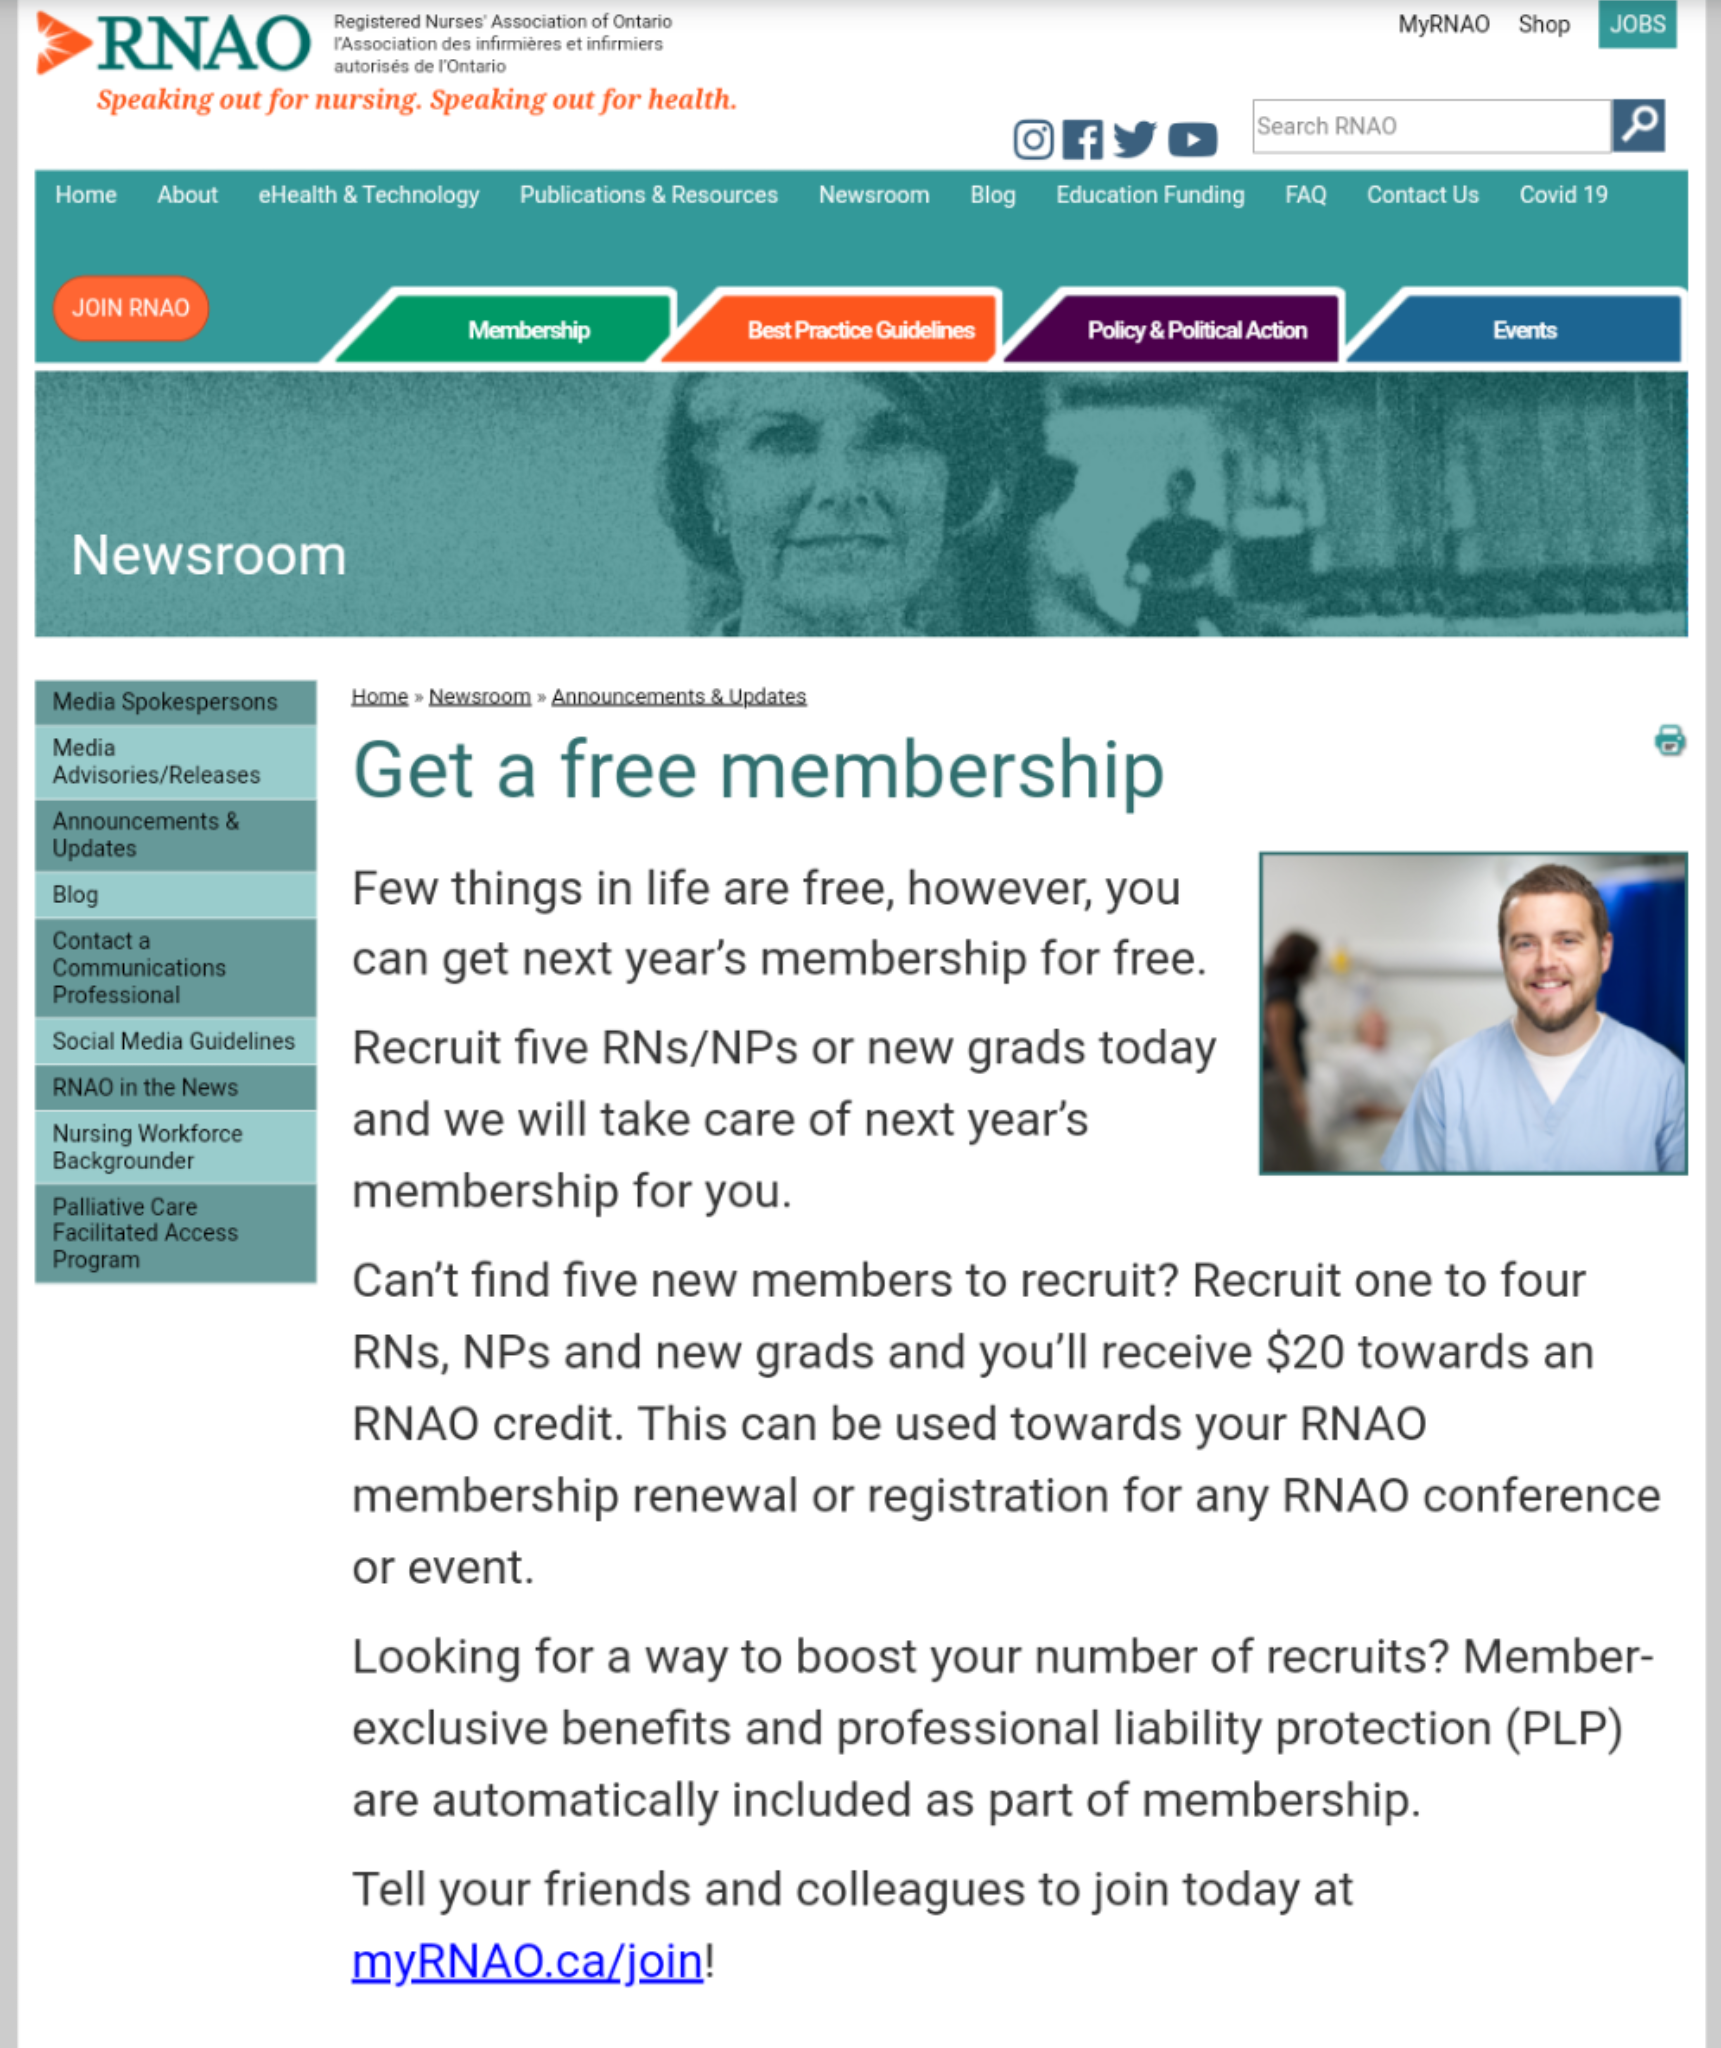 Registered Nurses’ Association of Ontario website offering a free membership for recruitment of 5 members, or a $20 RNAO credit for 1-4 recruited members. 